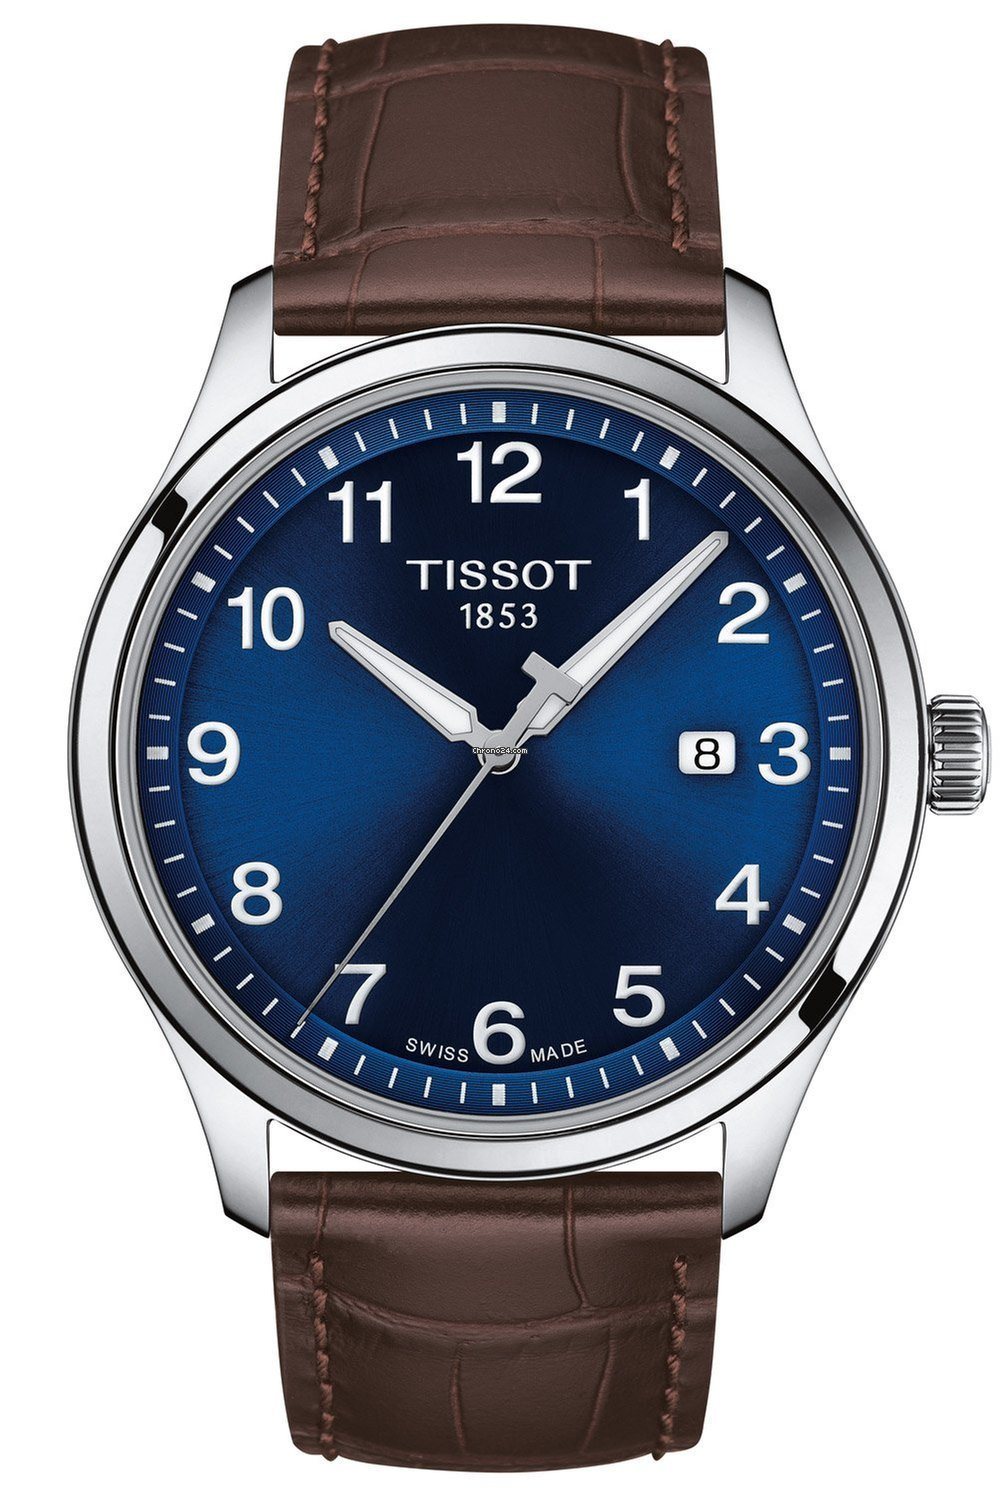 TISSOT GENT XL CLASSIC 22MM BROWN LEATHER STRAP image